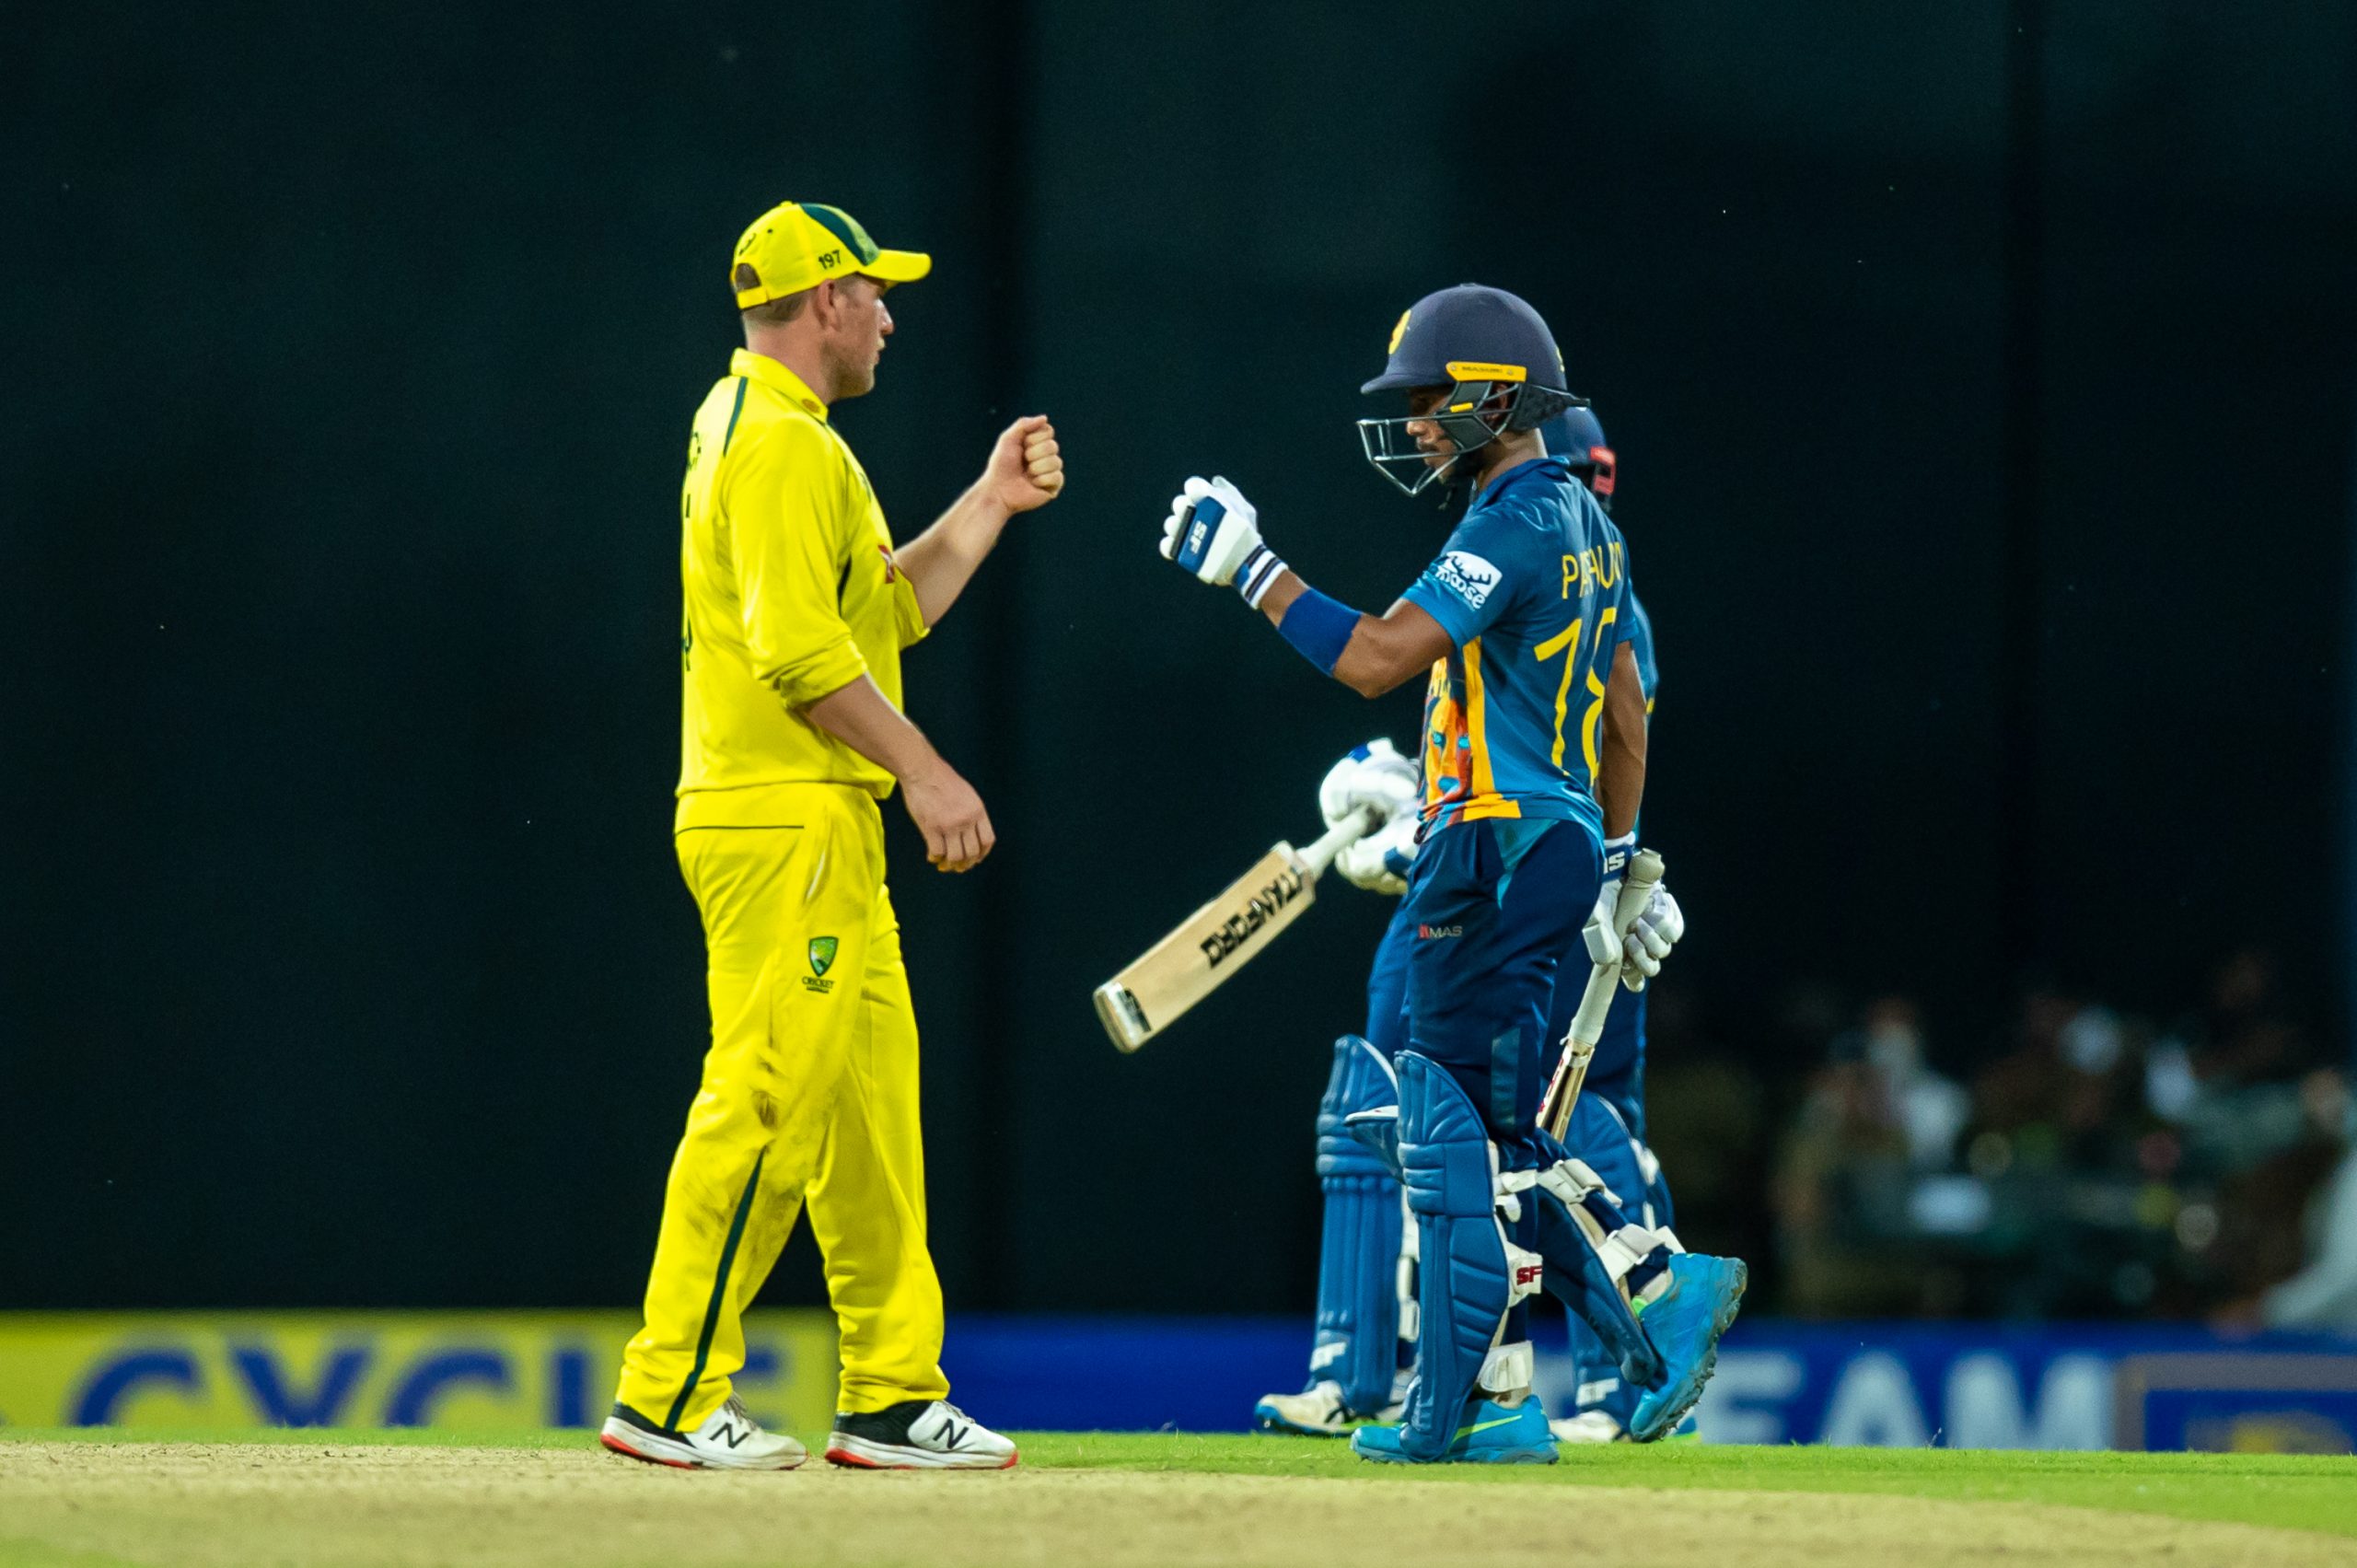 Sri Lanka in final face off vs Aussies from 3-1 box seat ascendancy